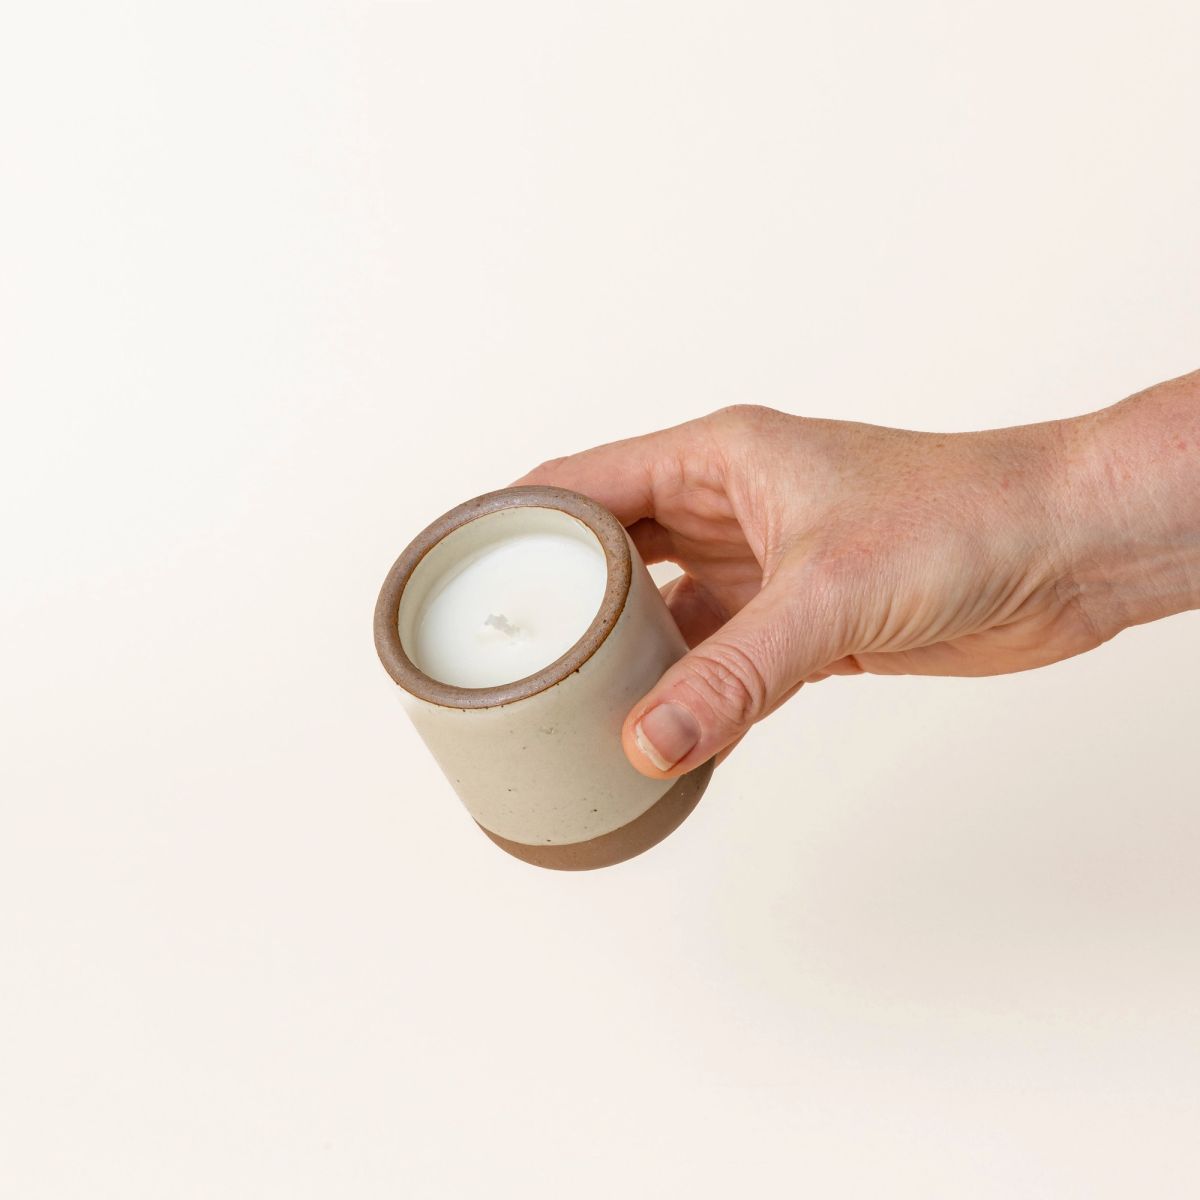 Hand holding a small ceramic vessel in a warm, tan-toned, off-white color with candle inside.